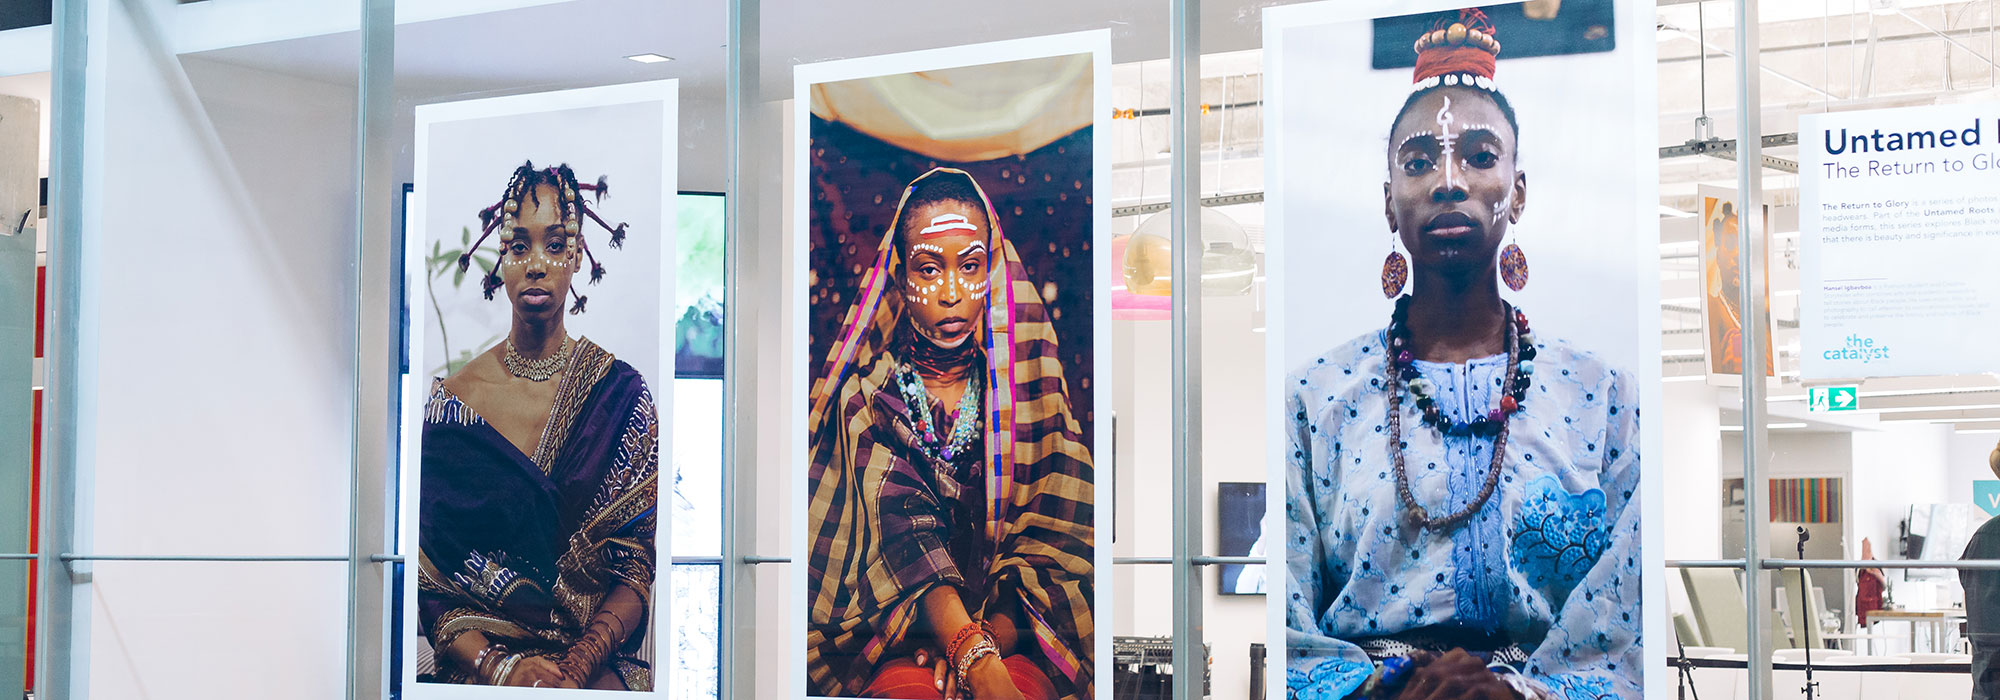 Enlarged photographic images of women in traditional dress mounted on a glass wall